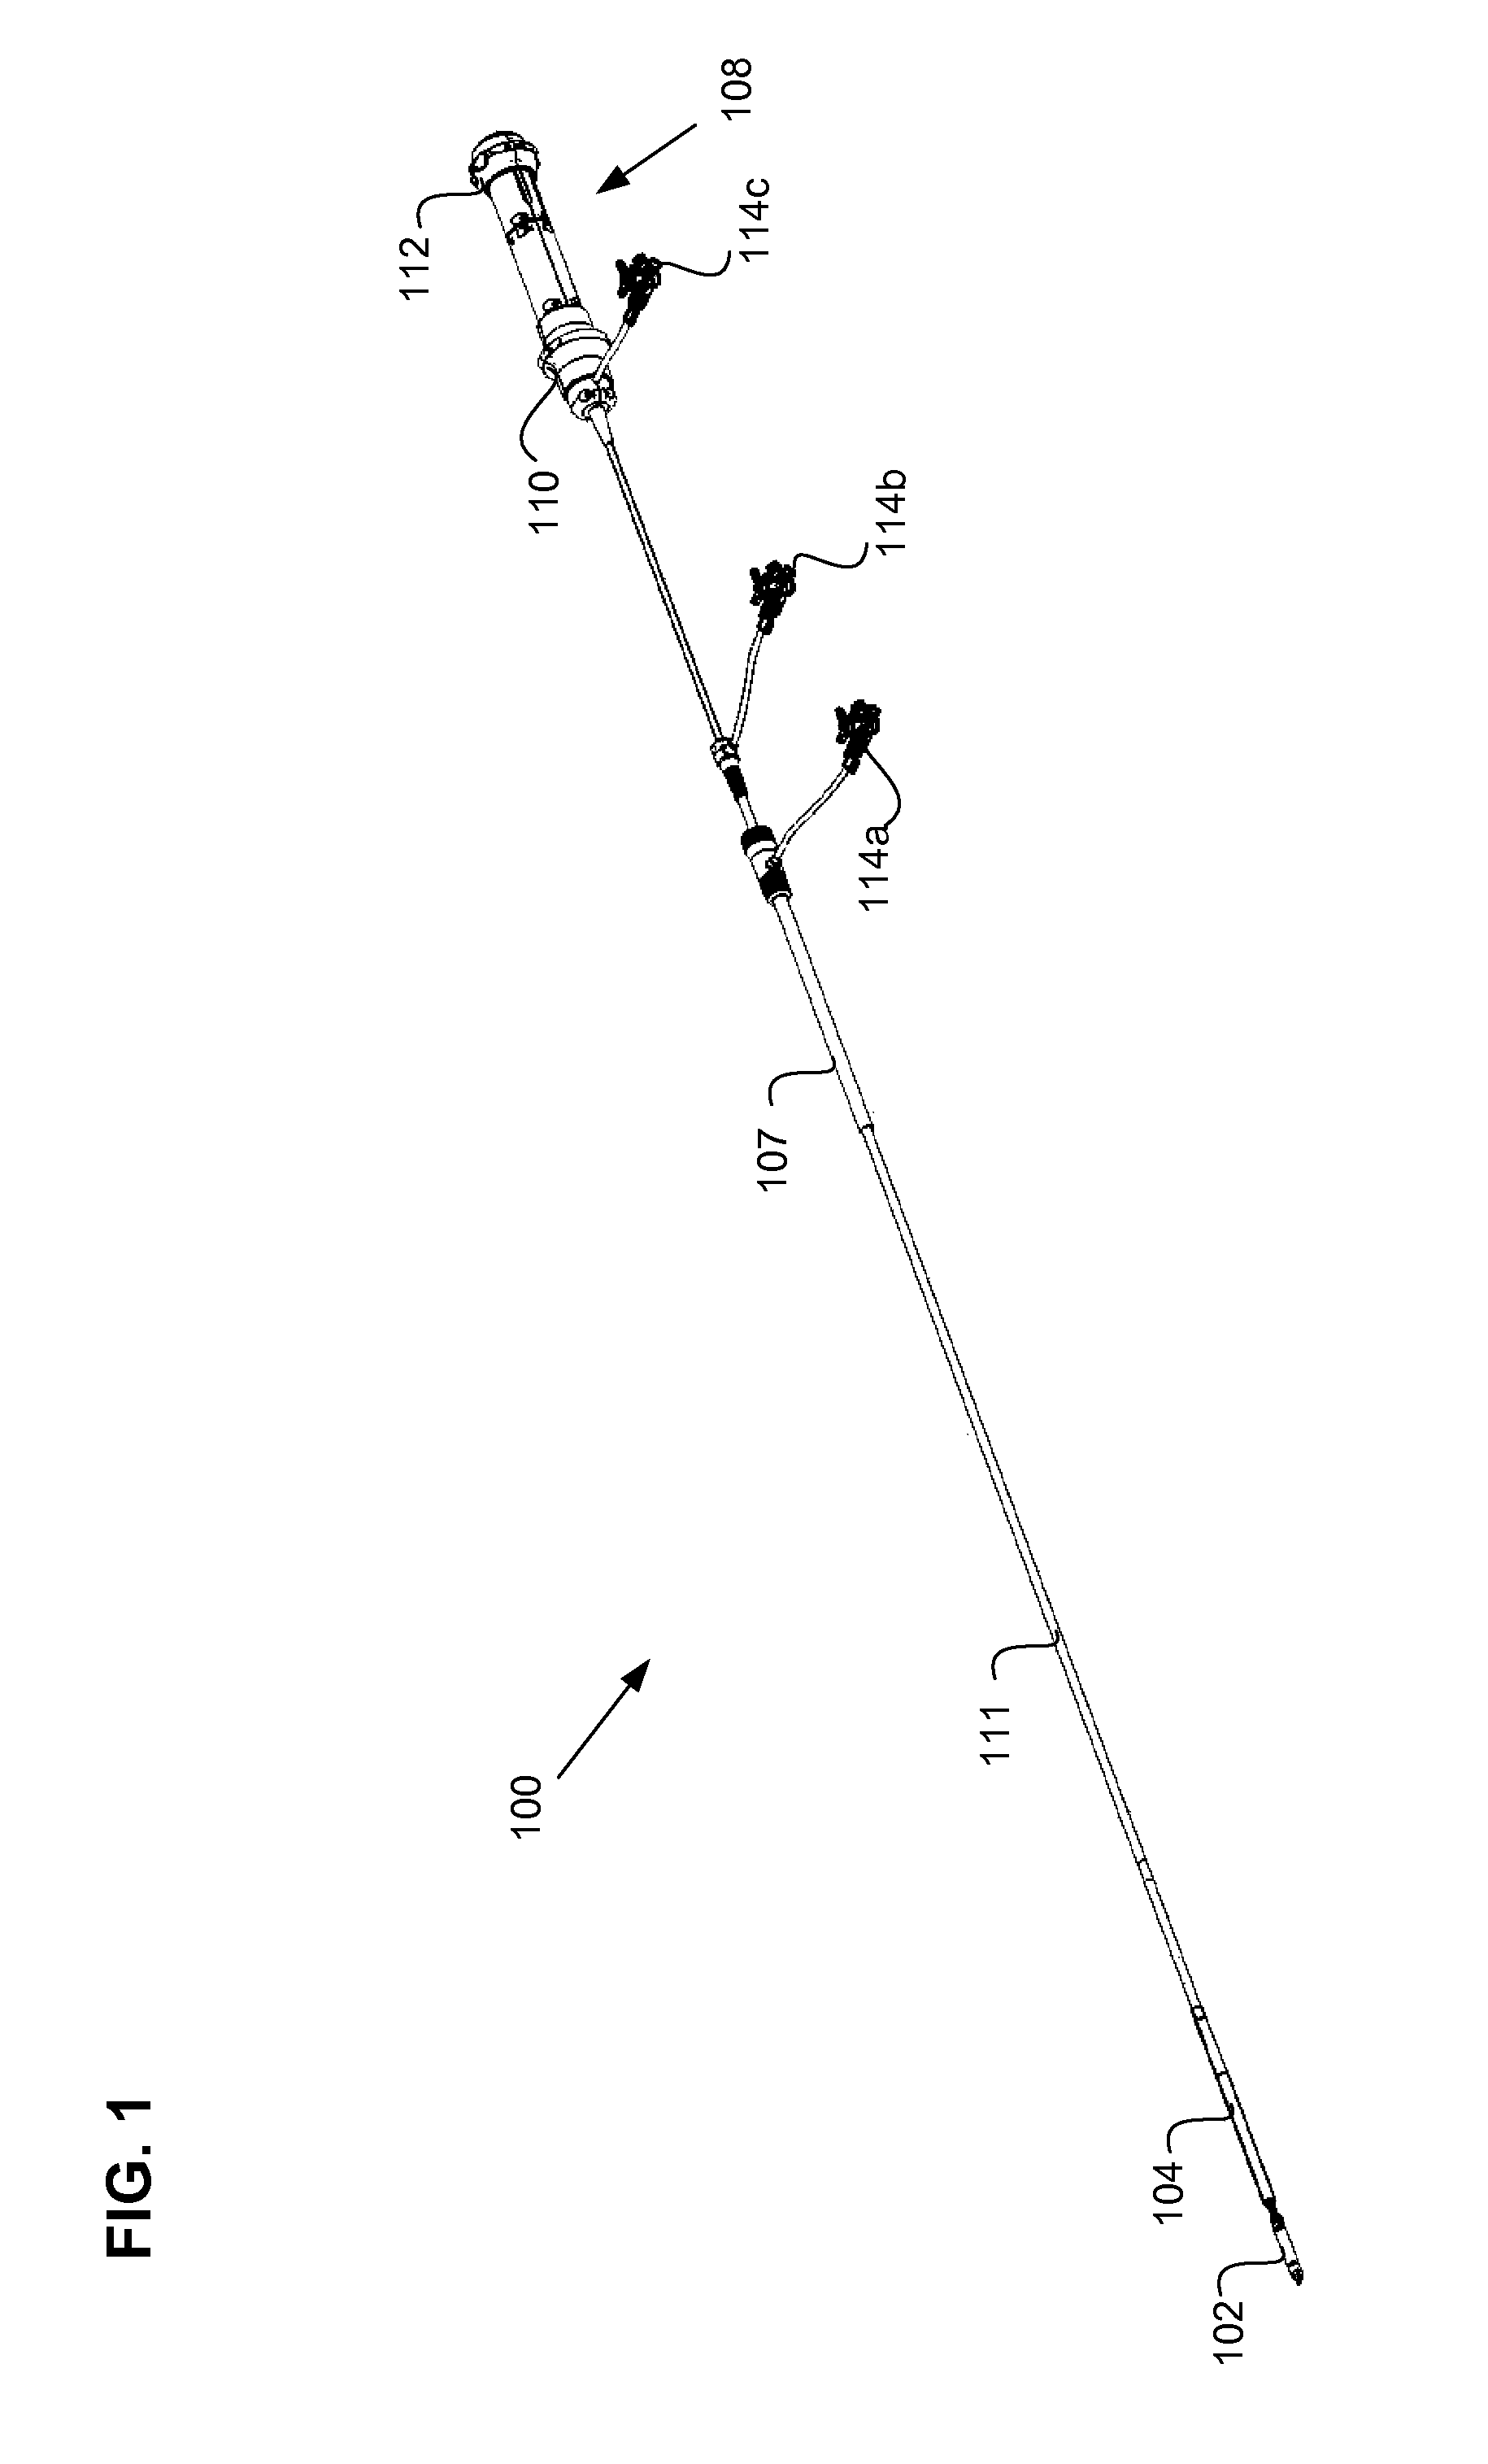 Delivery catheter systems and methods